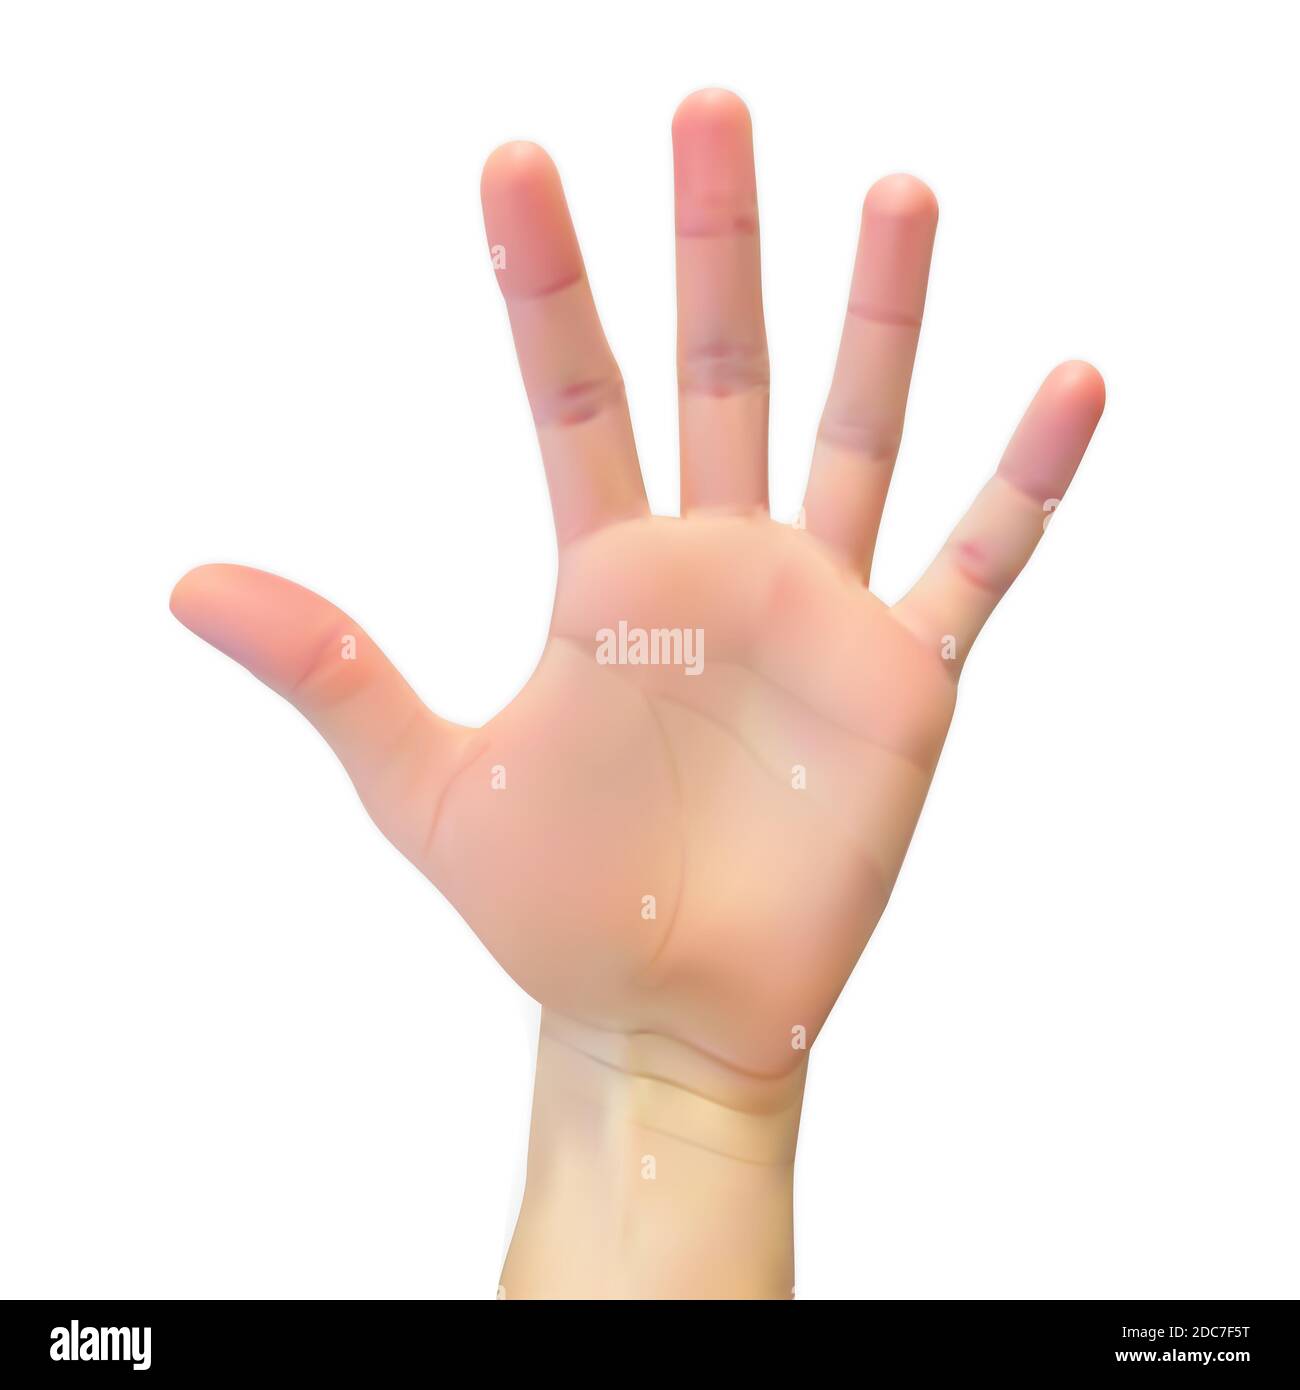 Realistic 3D Silhouette of an open hand on White Background. Illustration. Stock Photo